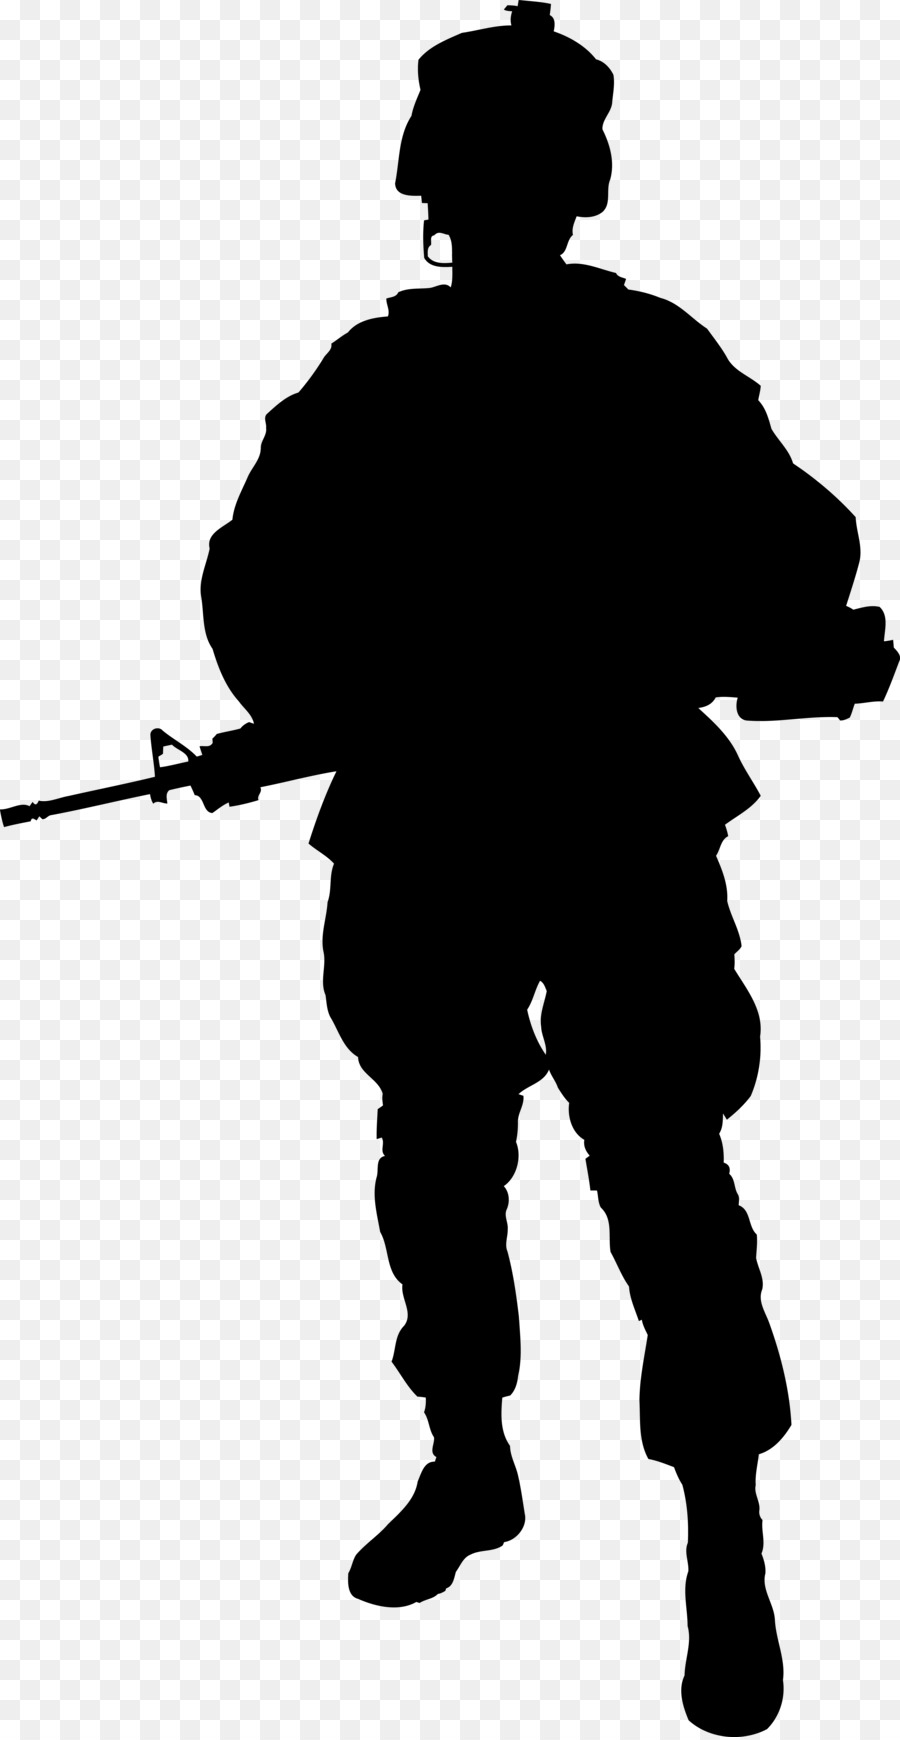 Soldier Silhouette clipart.